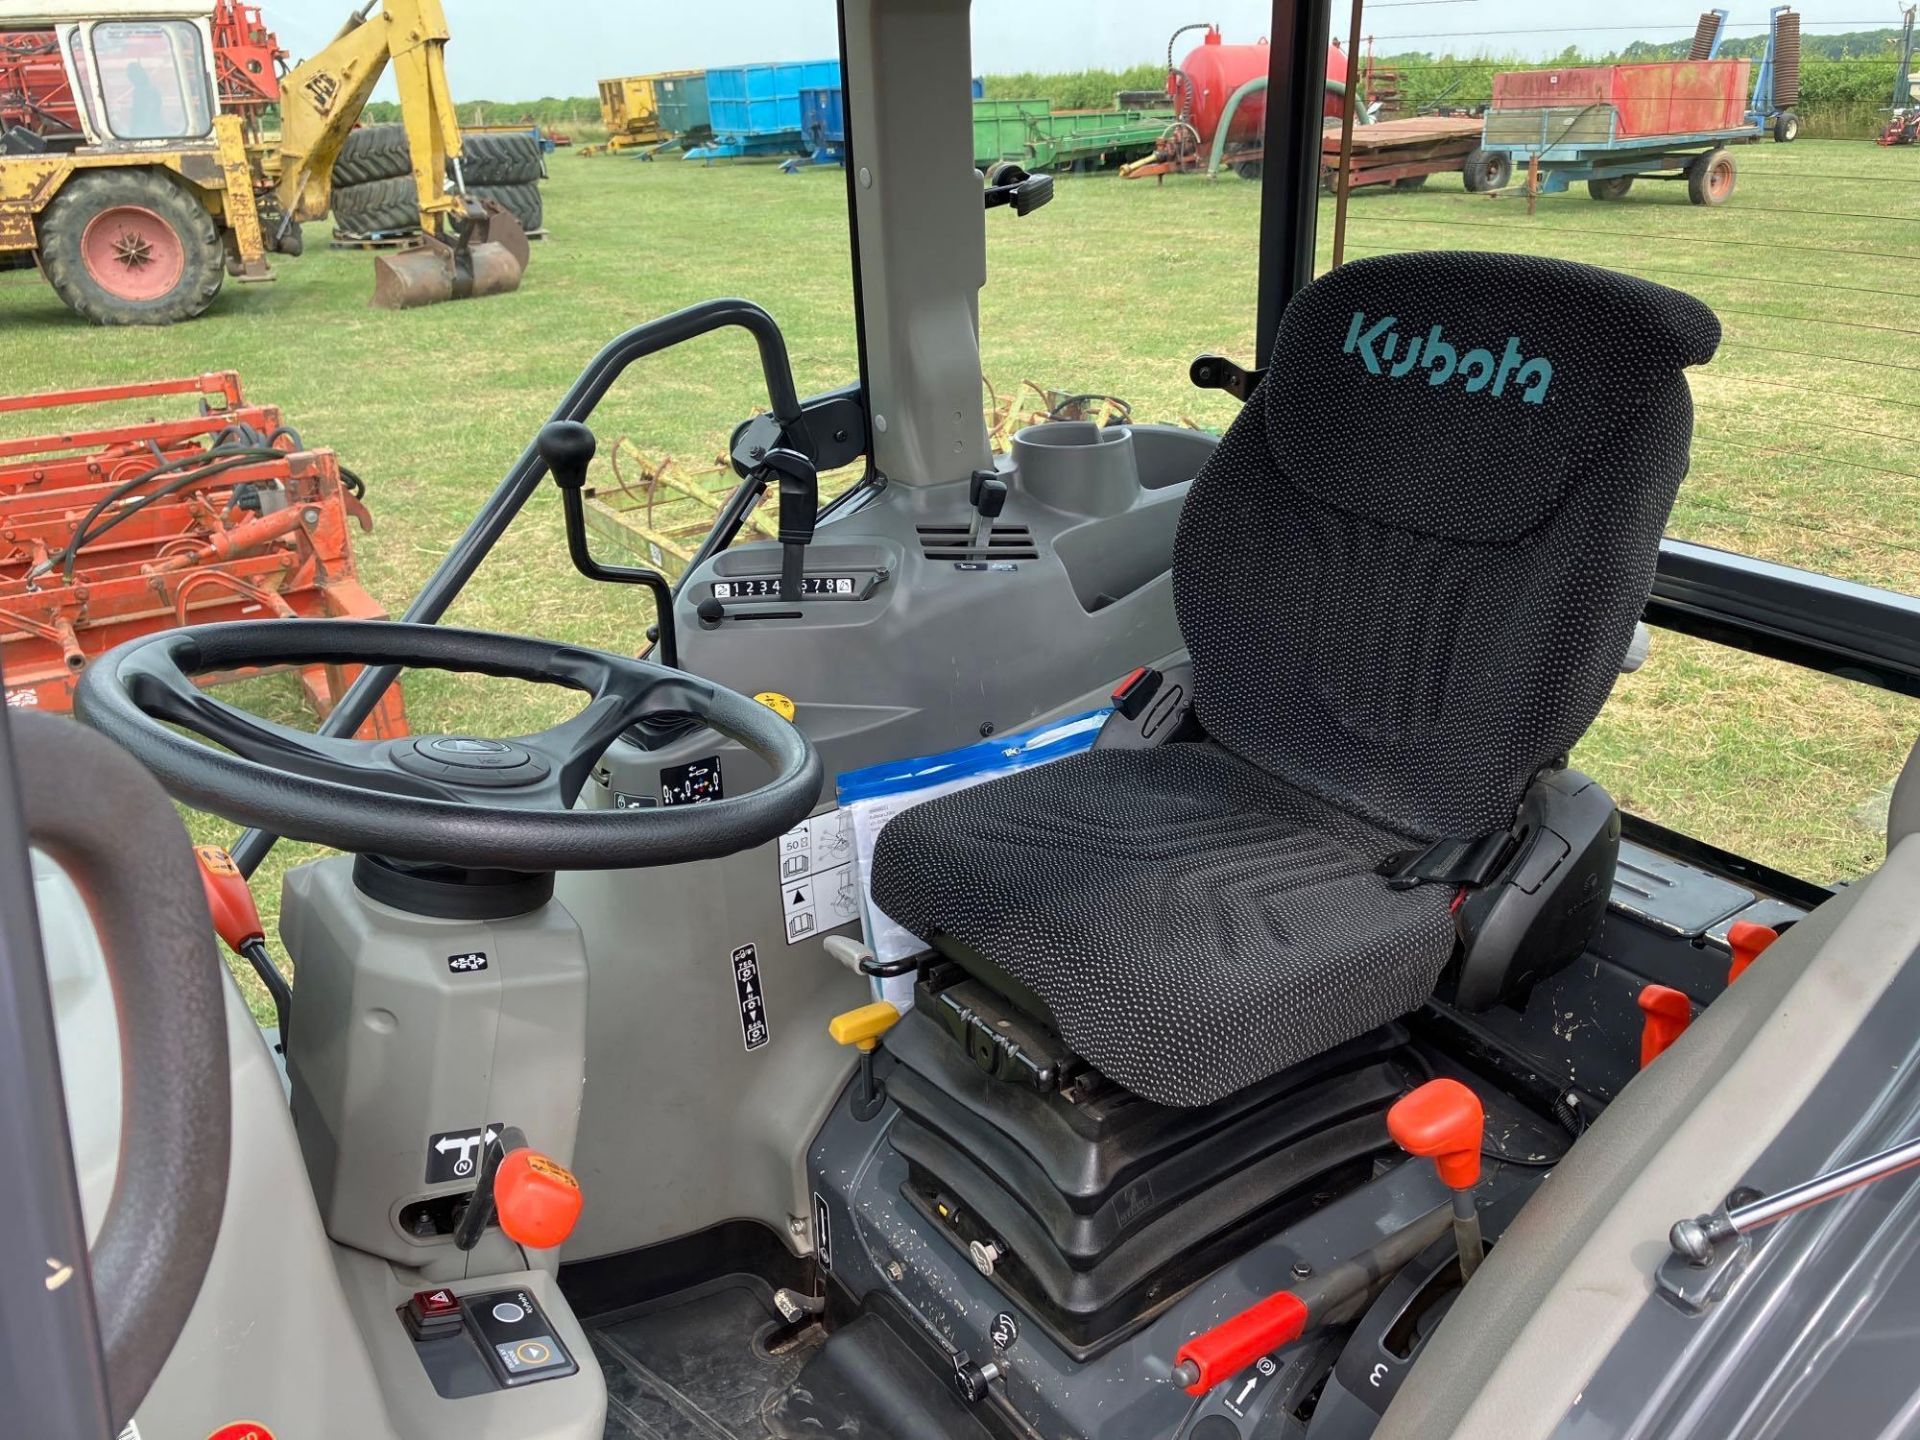 2020 Kubota L2501 4wd compact tractor with air con, DAB radio, CAT1 link arms, 2 rear spools, front - Image 10 of 14